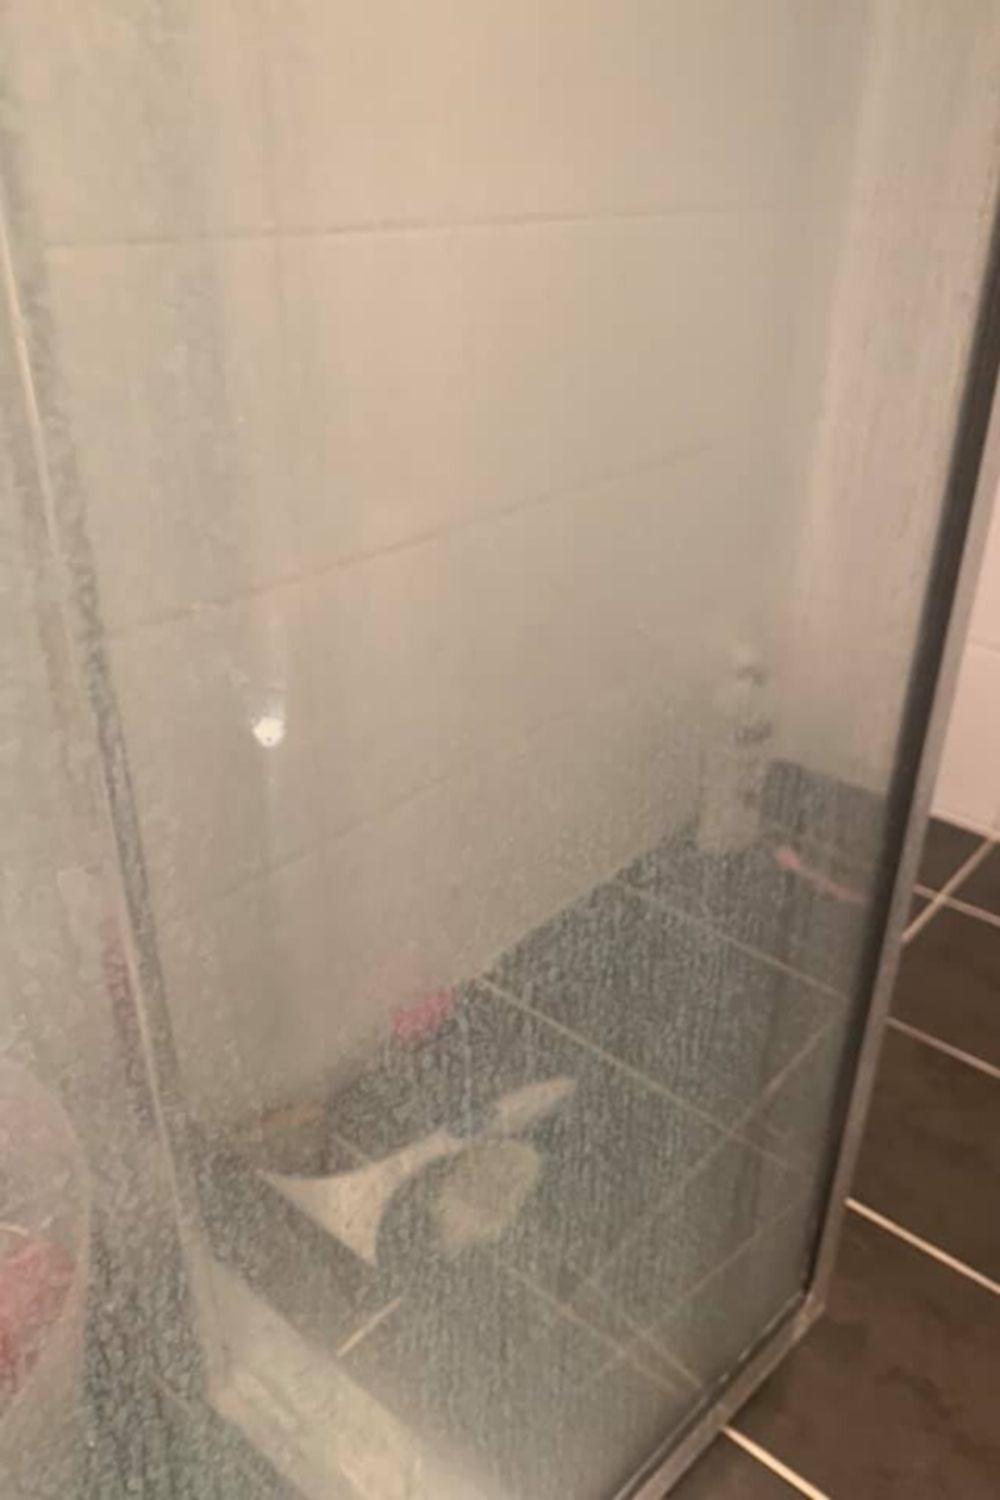 'I’ve tried everything': Aussie mum swears by Bunnings miracle shower cleaner